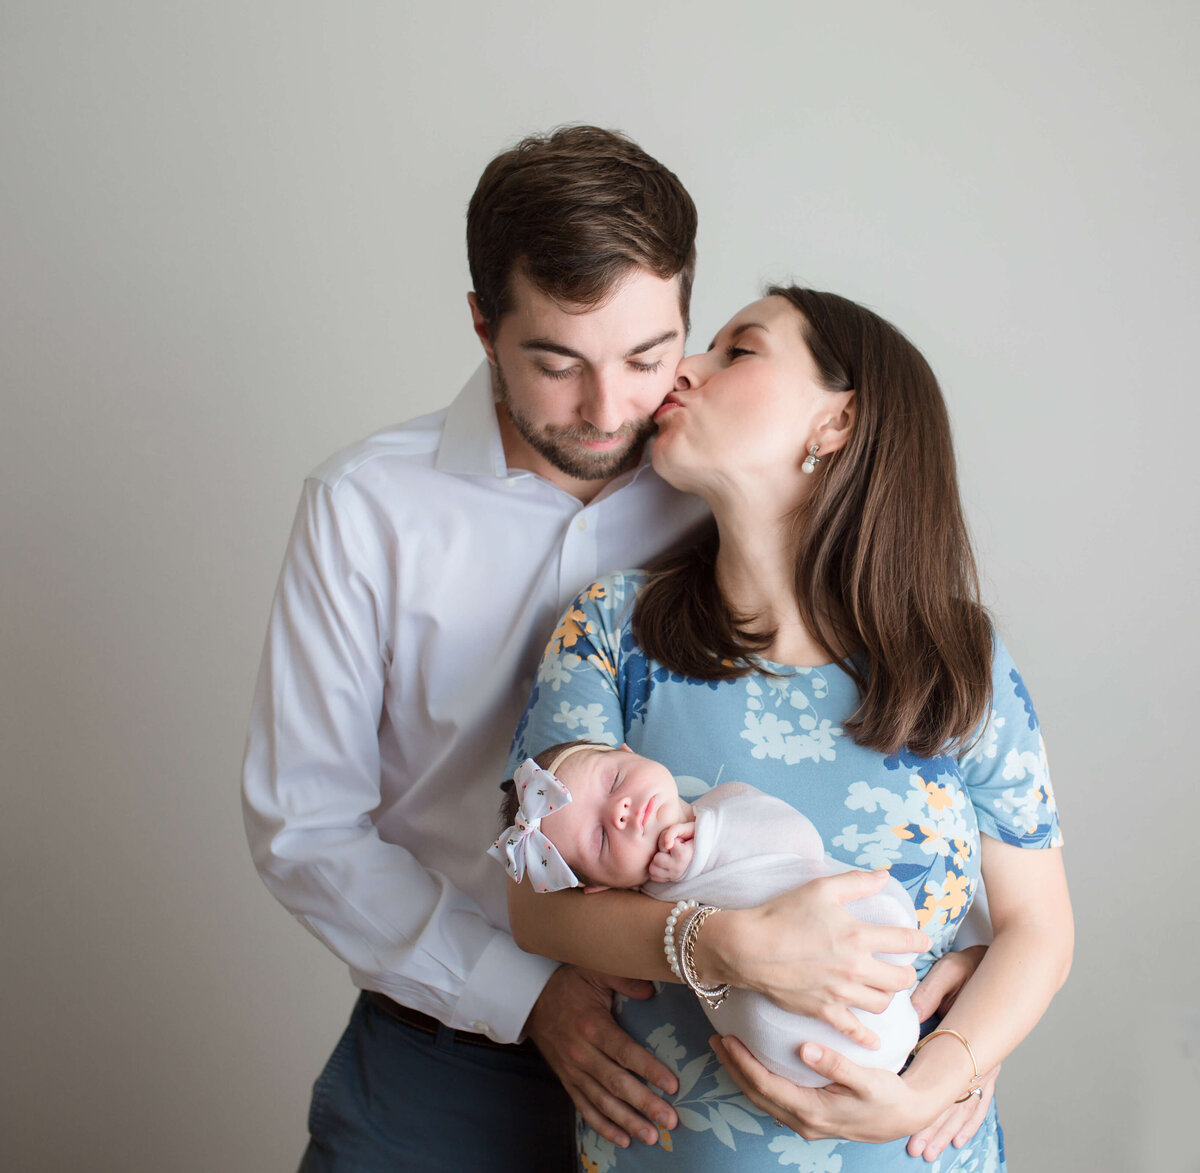 New parents hold their baby daughter